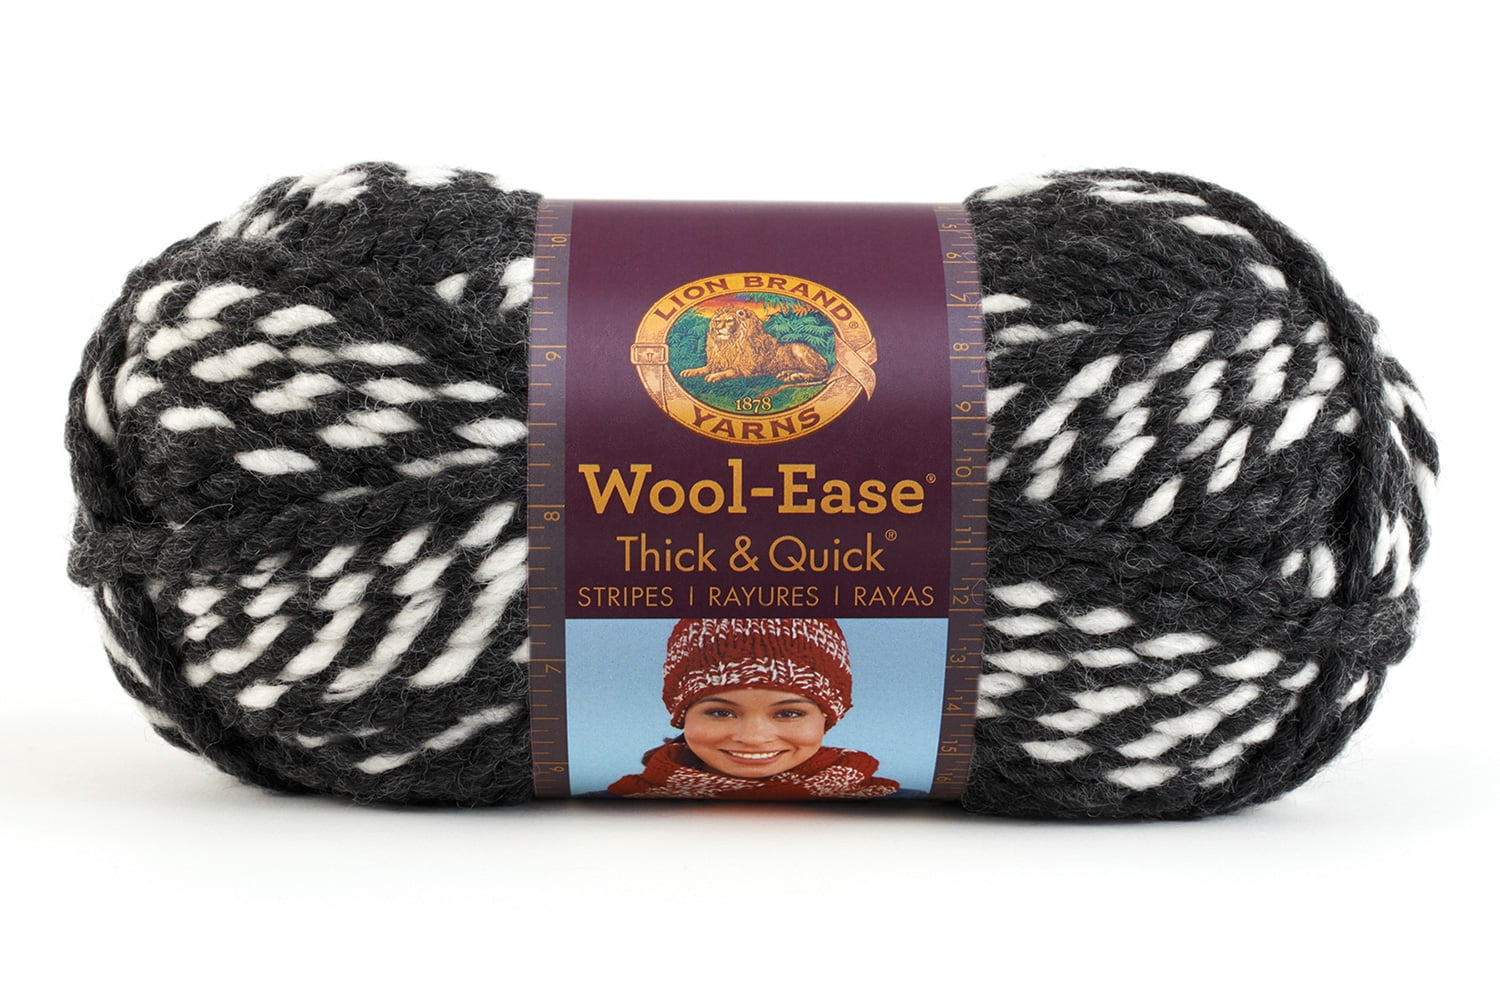 Lion Brand® Wool-Ease® Thick and Quick Yarn - Barley, 6 oz - City Market